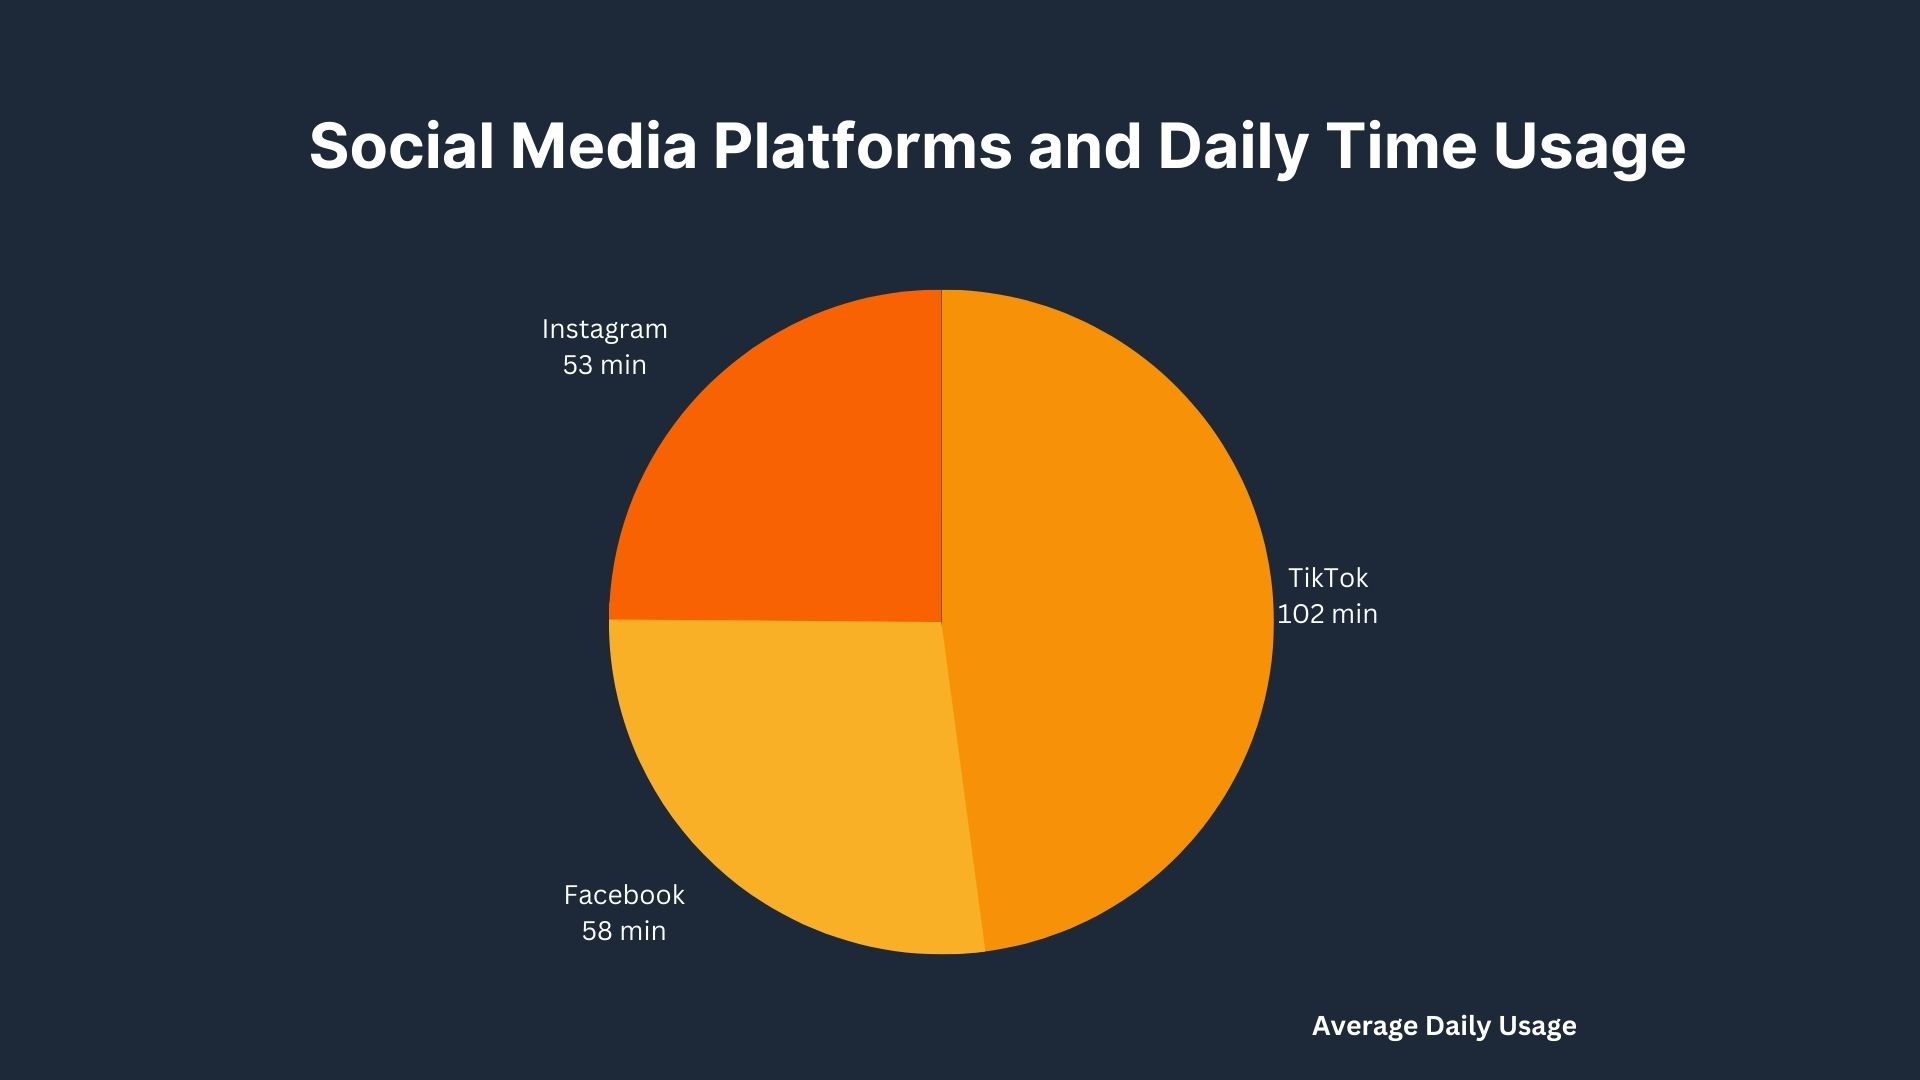 Social Media Platforms and Daily Time Usage